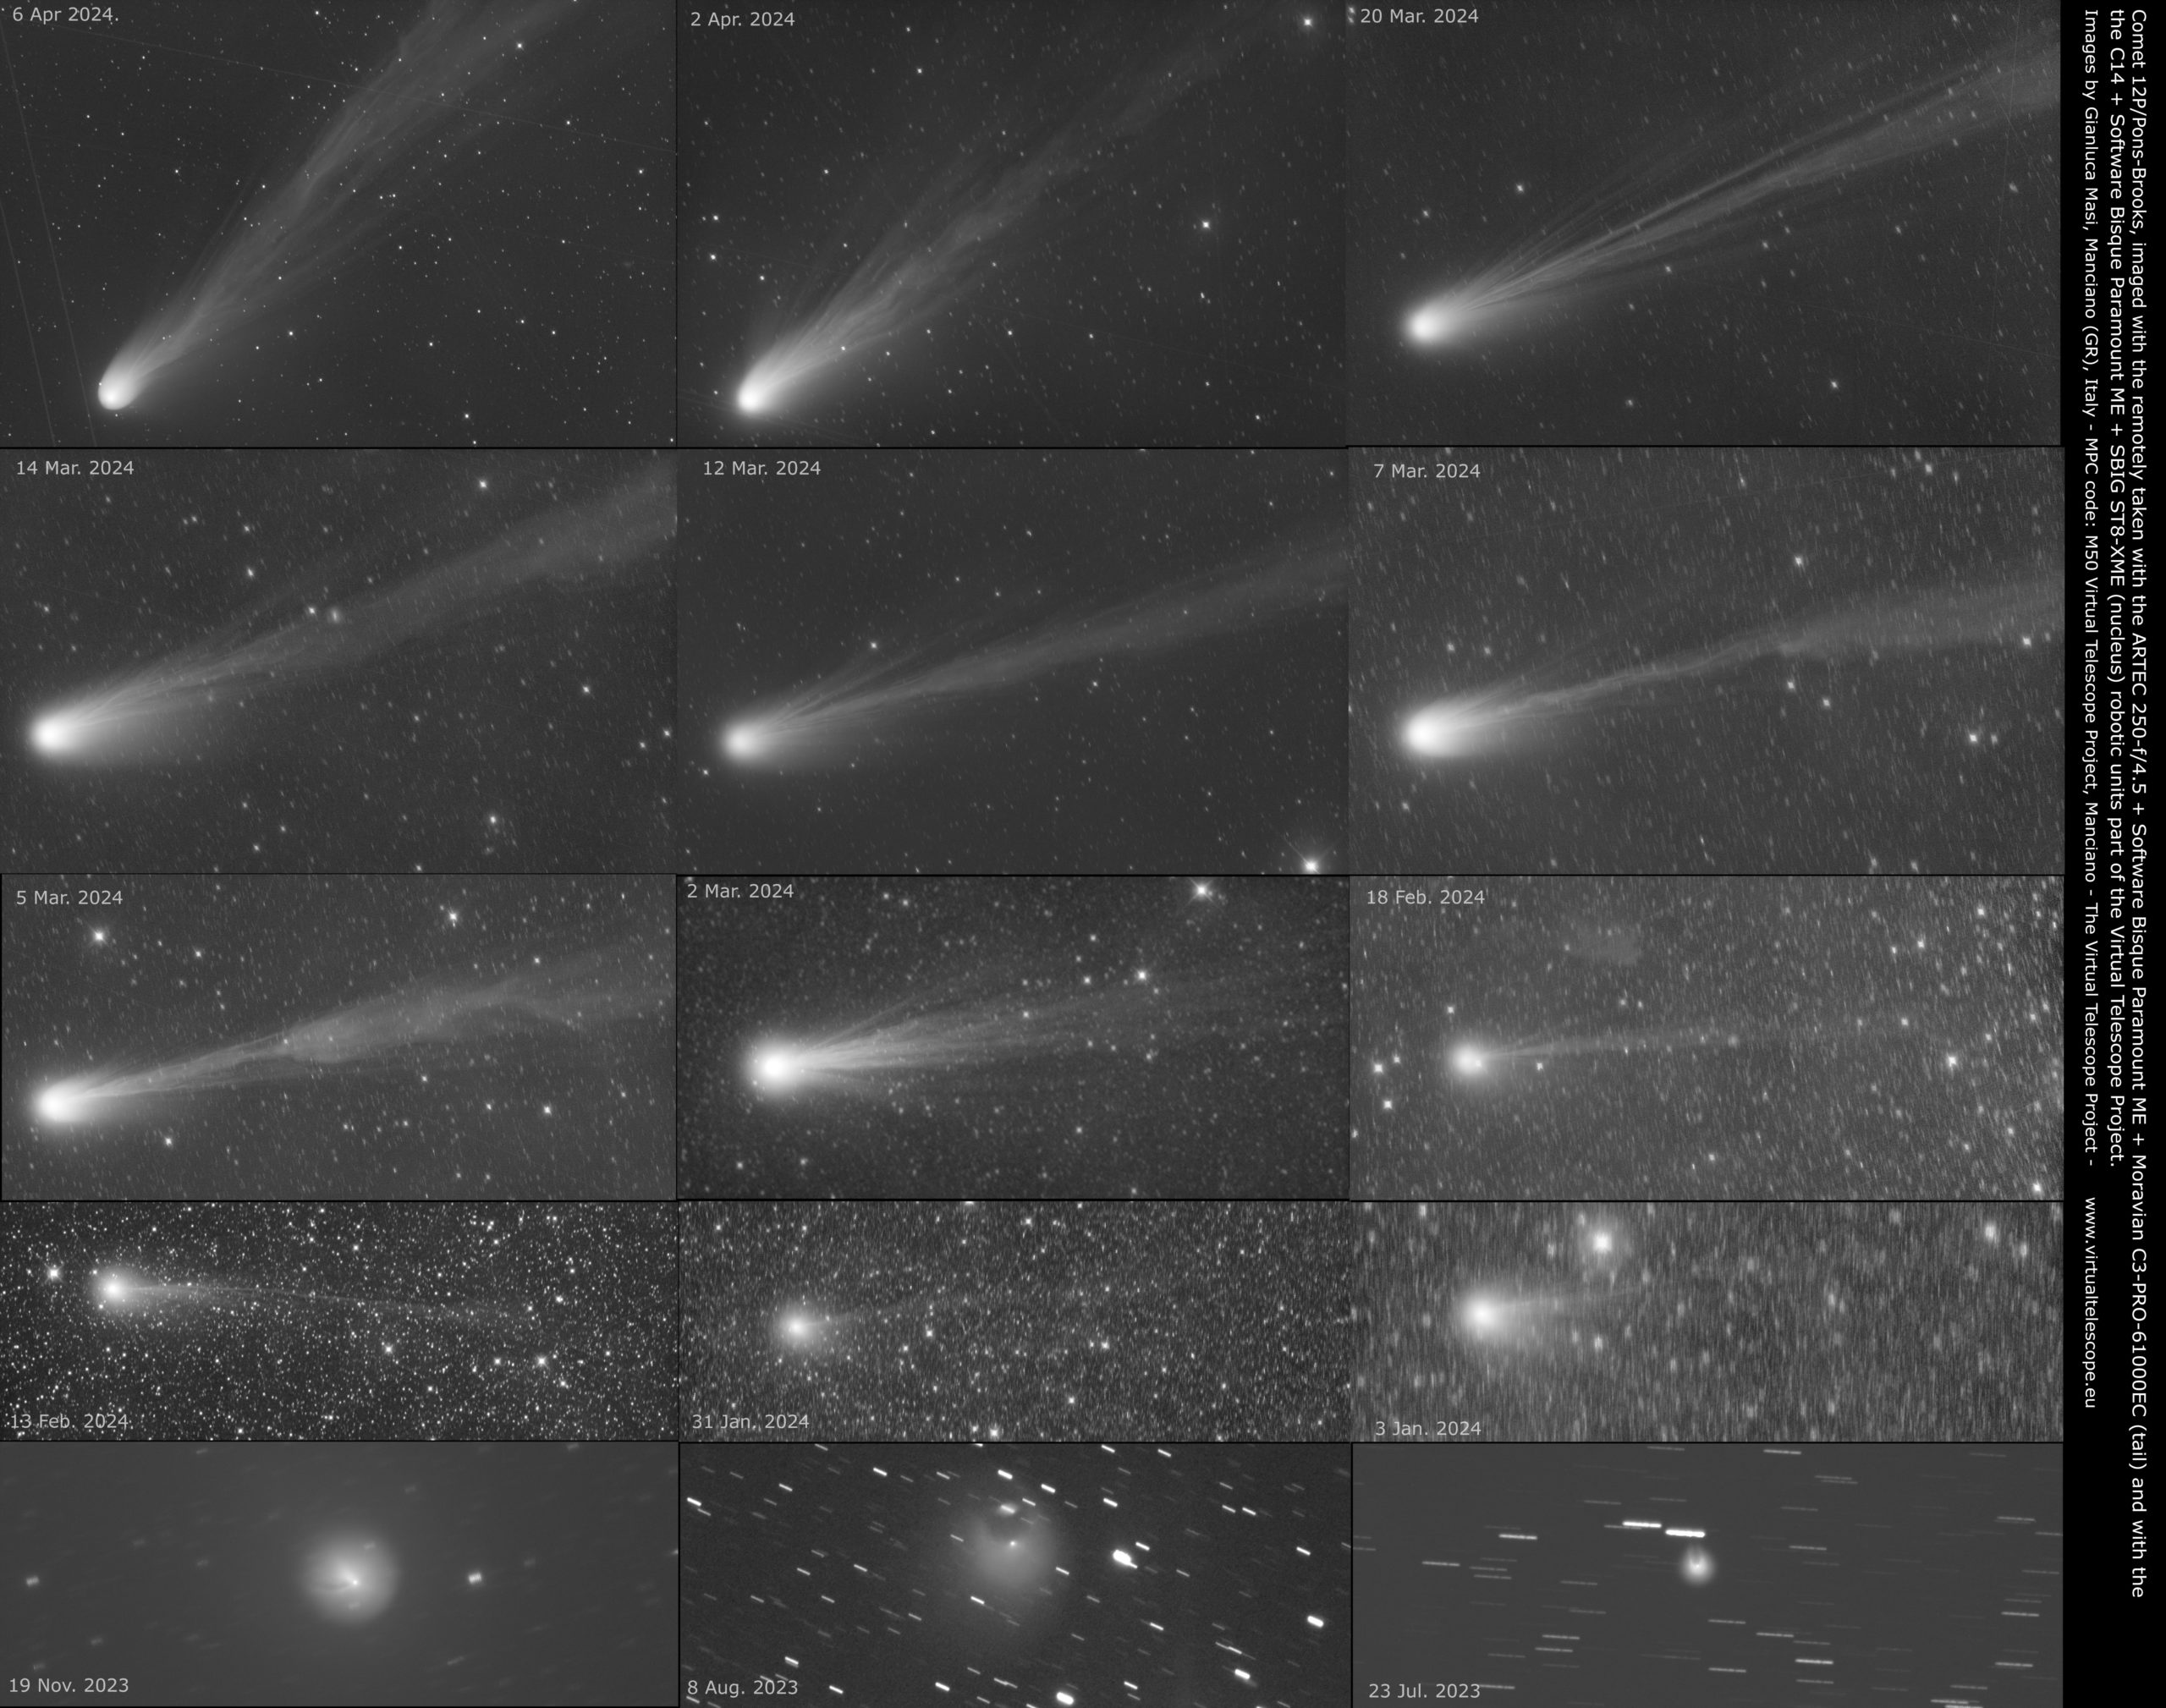 Comet 12P/Pons-Brooks: evolution of its tail and inner coma.